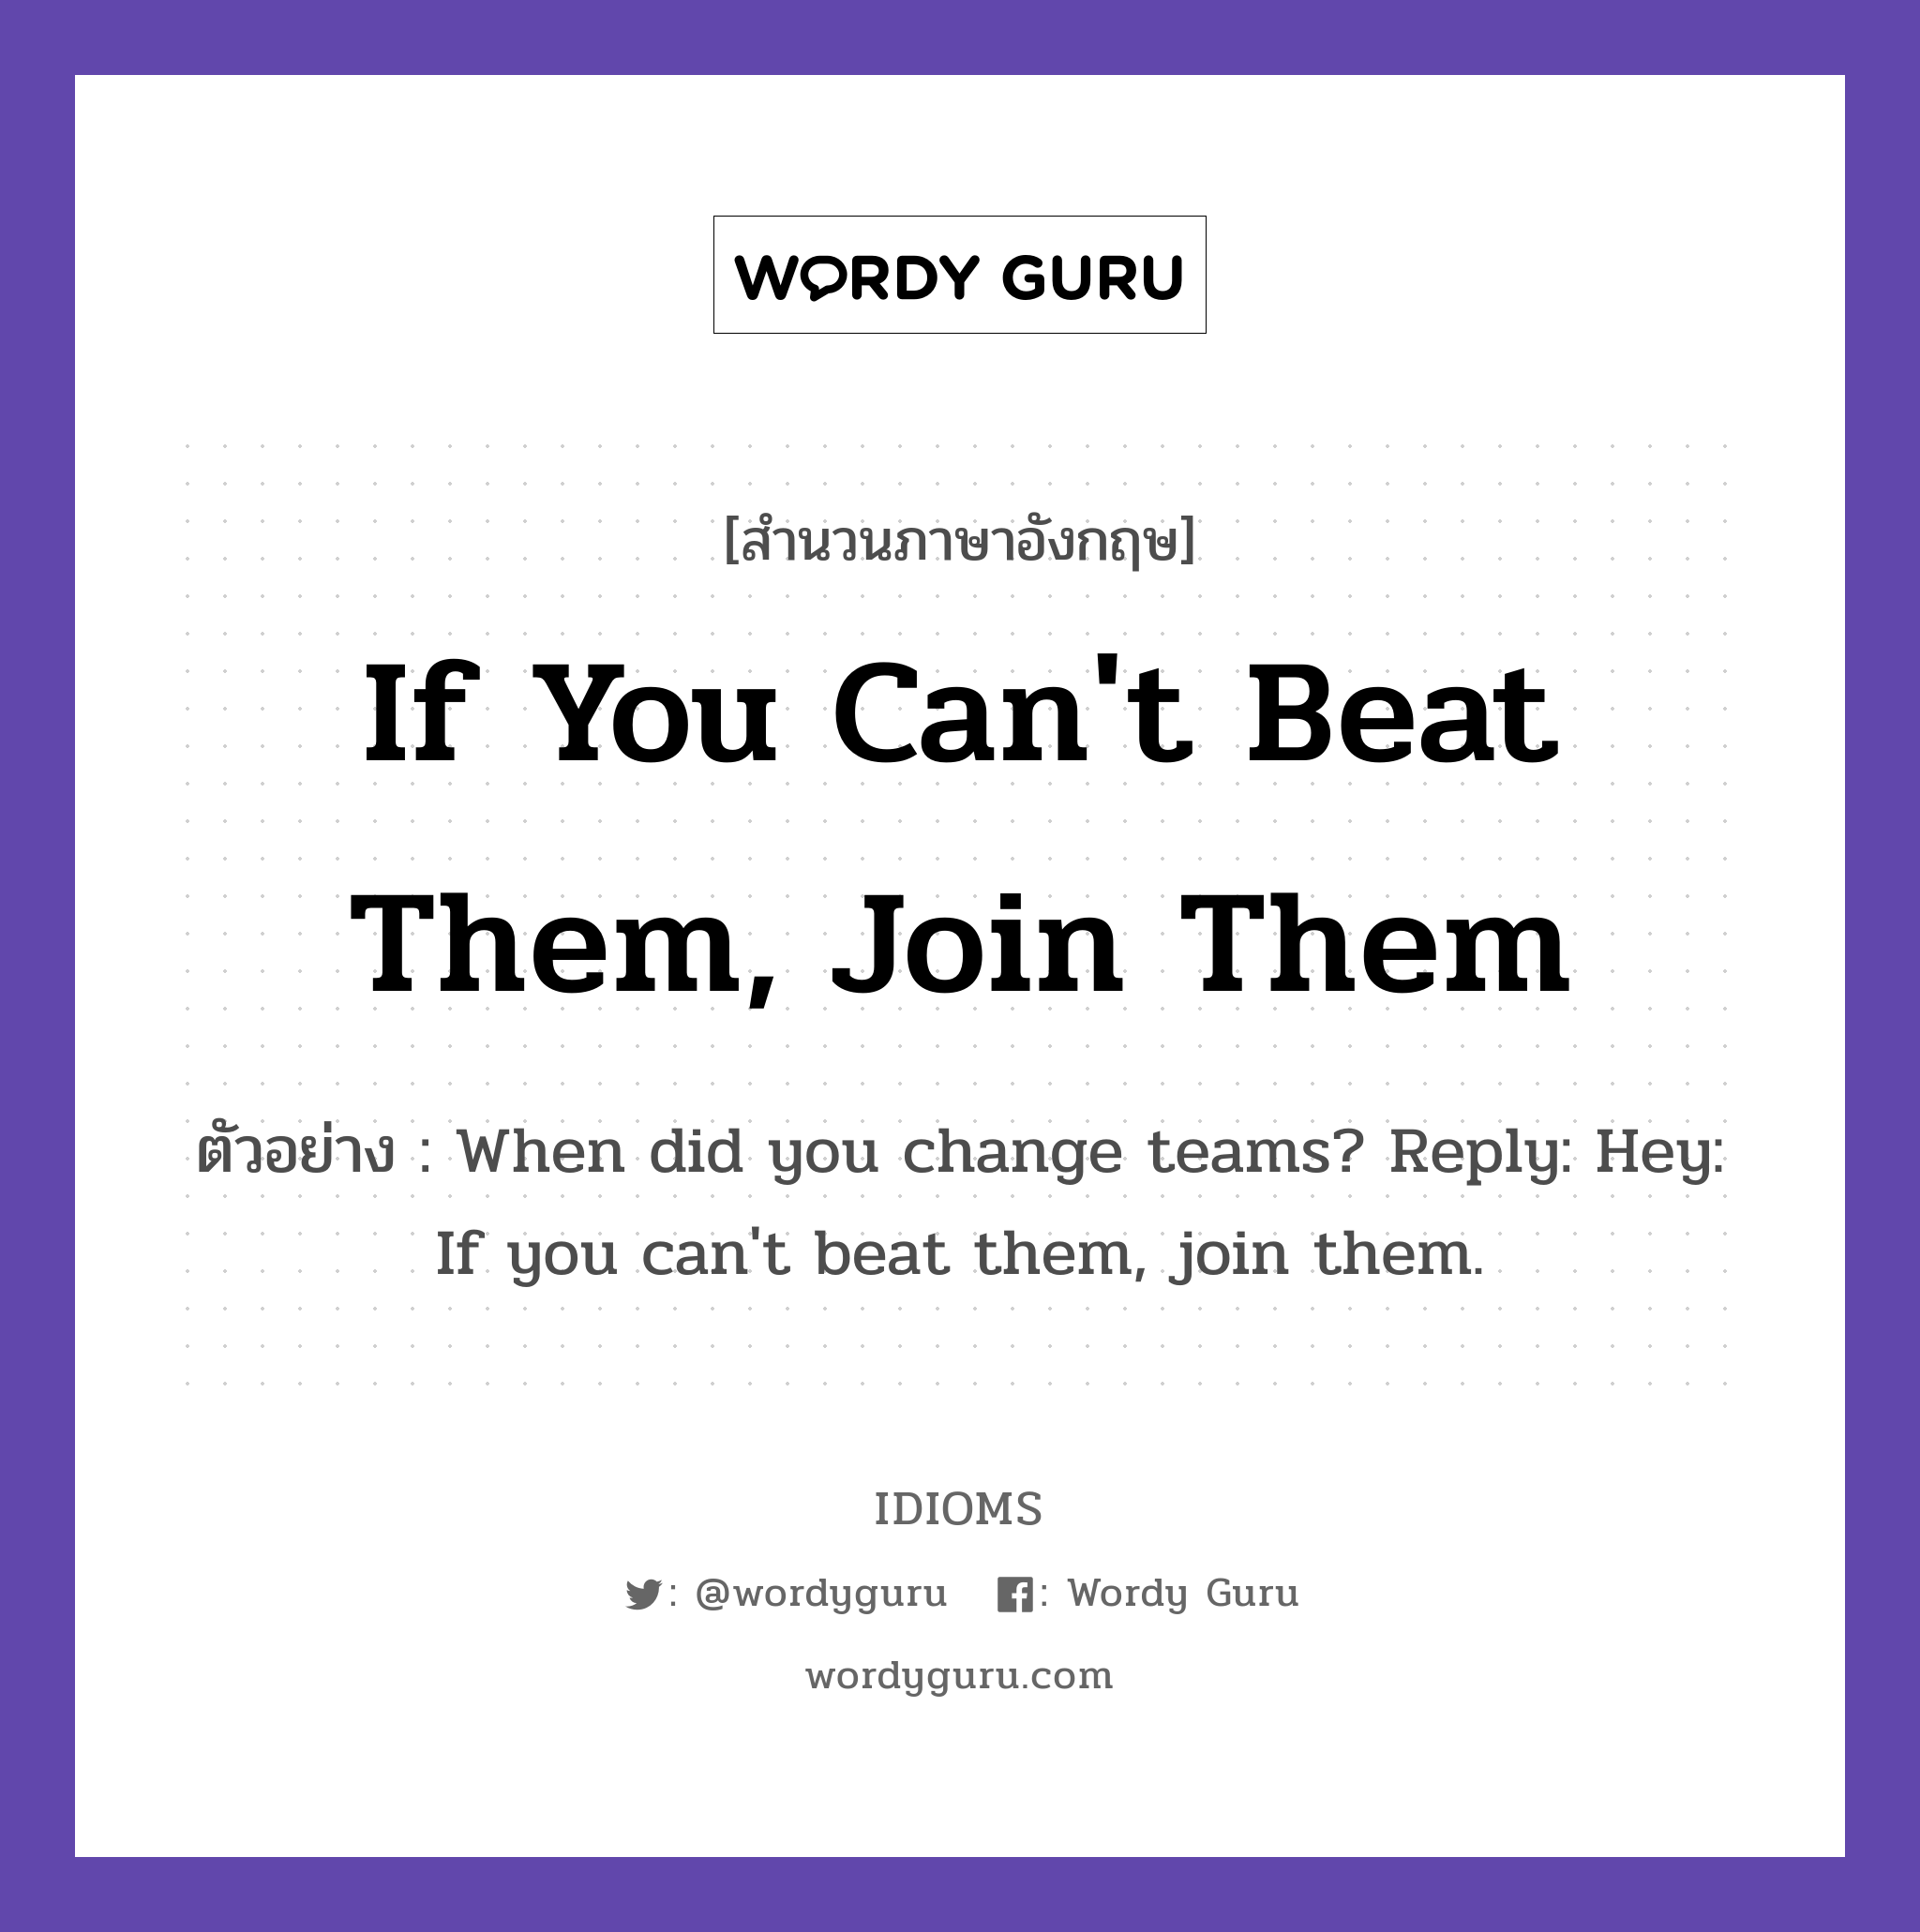 If You Can't Beat Them, Join Them แปลว่า?, สำนวนภาษาอังกฤษ If You Can't Beat Them, Join Them ตัวอย่าง When did you change teams? Reply: Hey: If you can't beat them, join them.